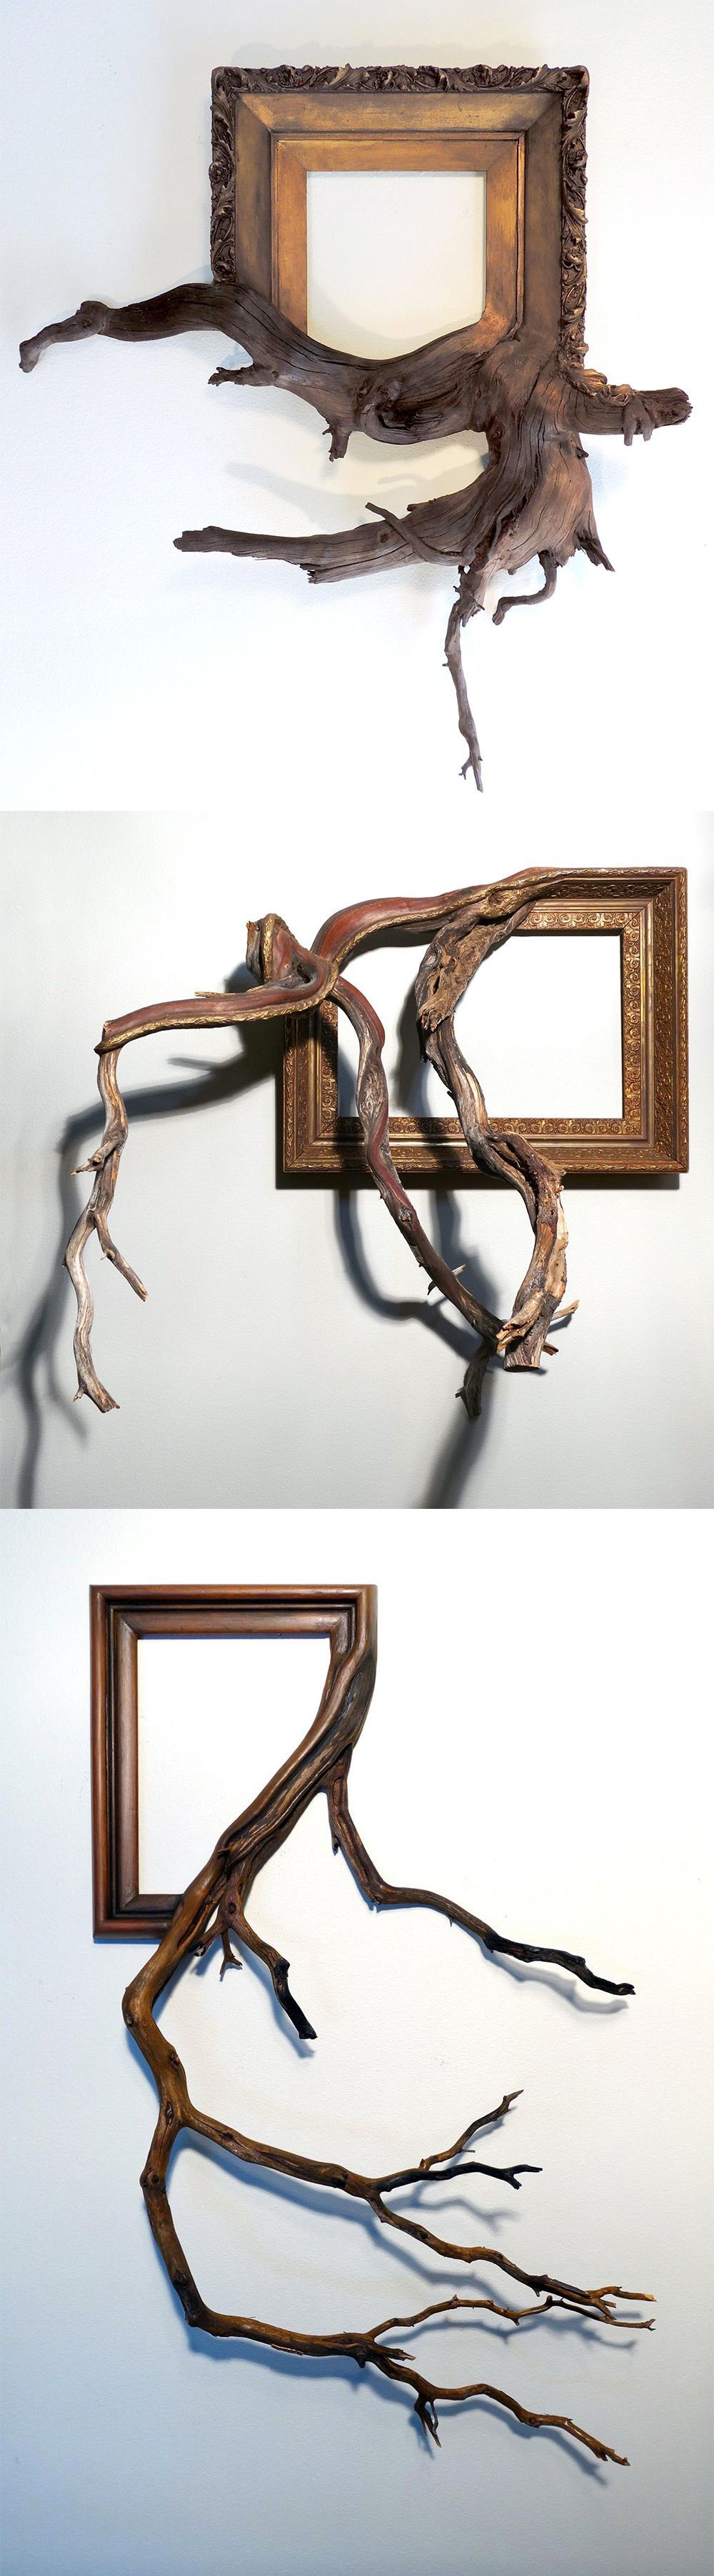 Twisted Tree Branches Fused with Ornate Picture Frames by Darryl Cox